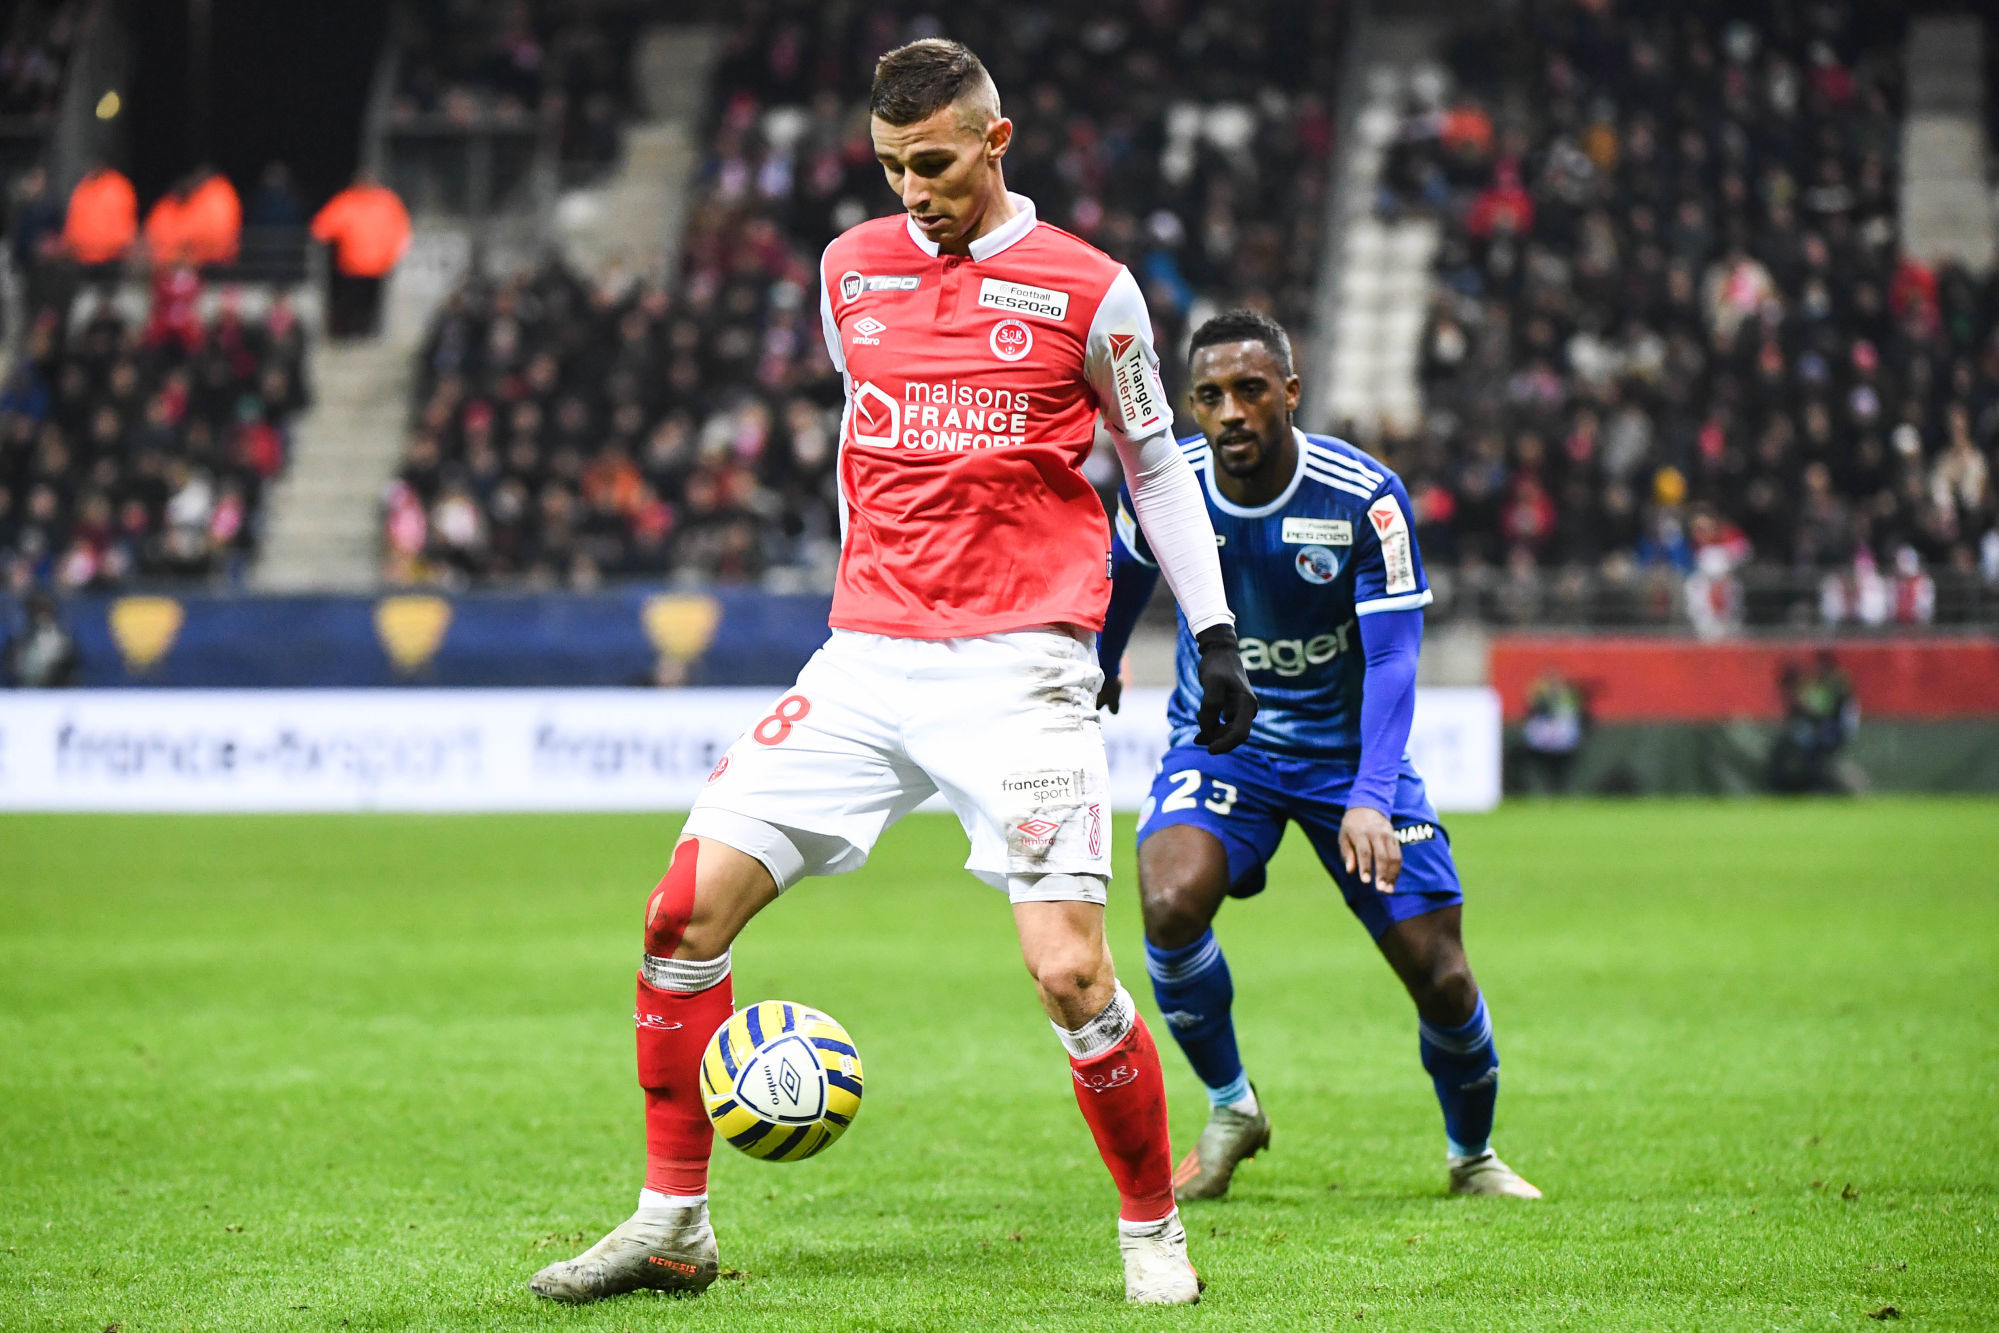 Remi OUDIN of Reims during the League Cup match between Reims and Strasbourg at Stade Auguste Delaune on January 7, 2020 in Reims, France. (Photo by Anthony Dibon/Icon Sport) - Lionel CAROLE - Remi OUDIN - Stade Auguste-Delaune - Reims (France)